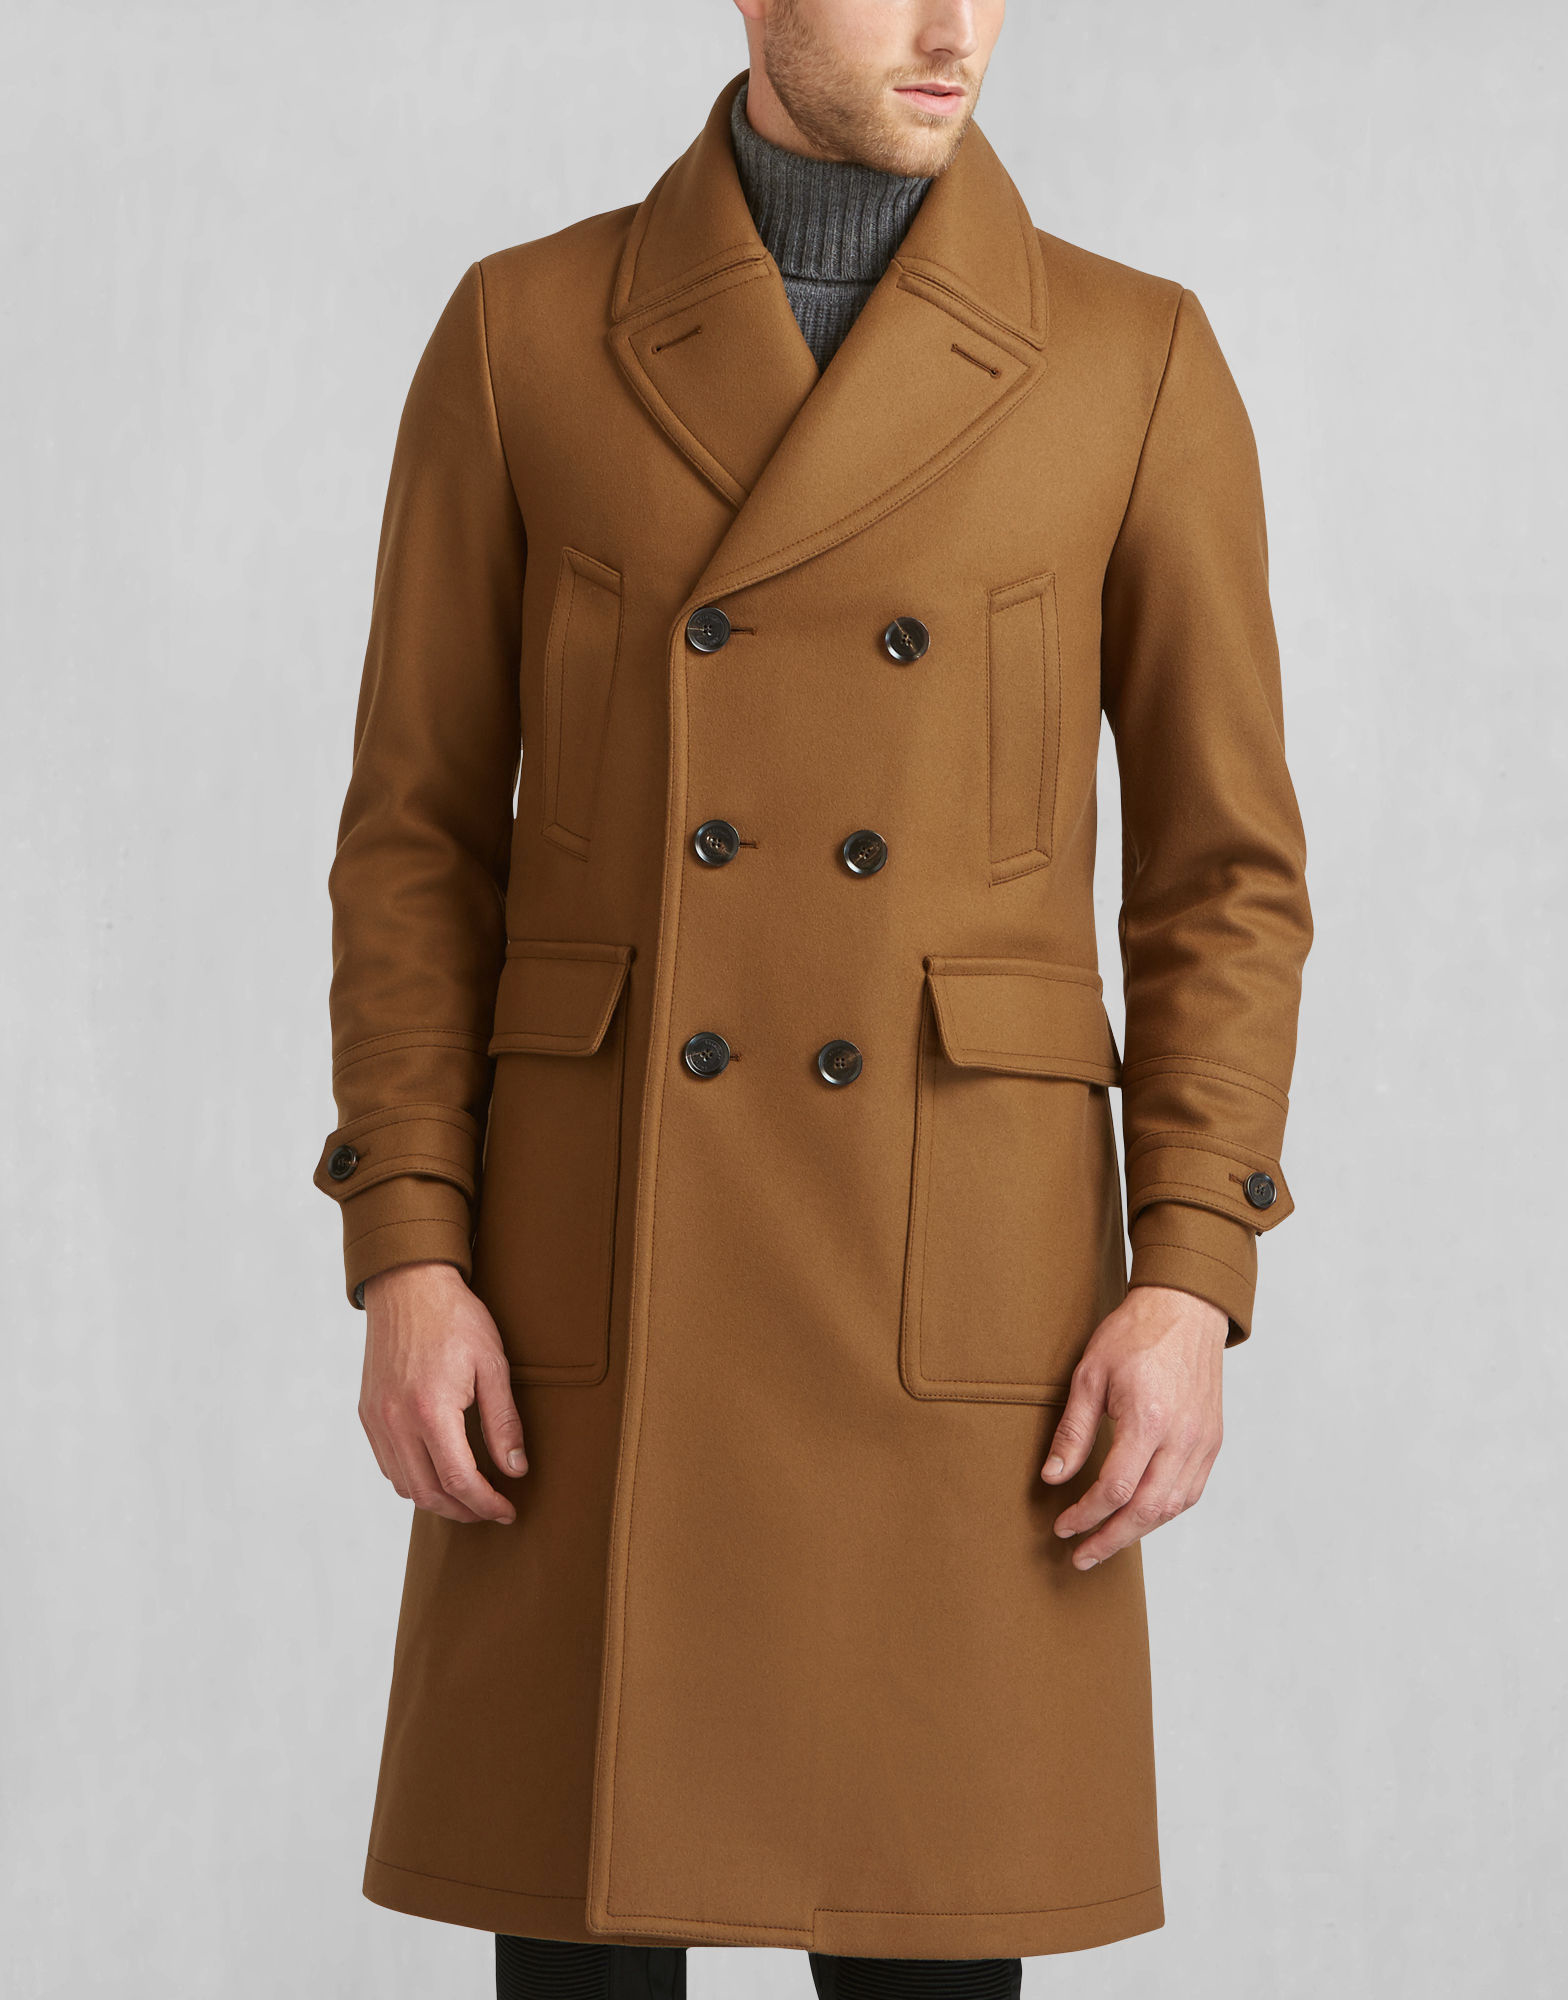 Belstaff New Milford Trench Coat In Heritage Khaki Cashmere & Wool for Men  - Lyst